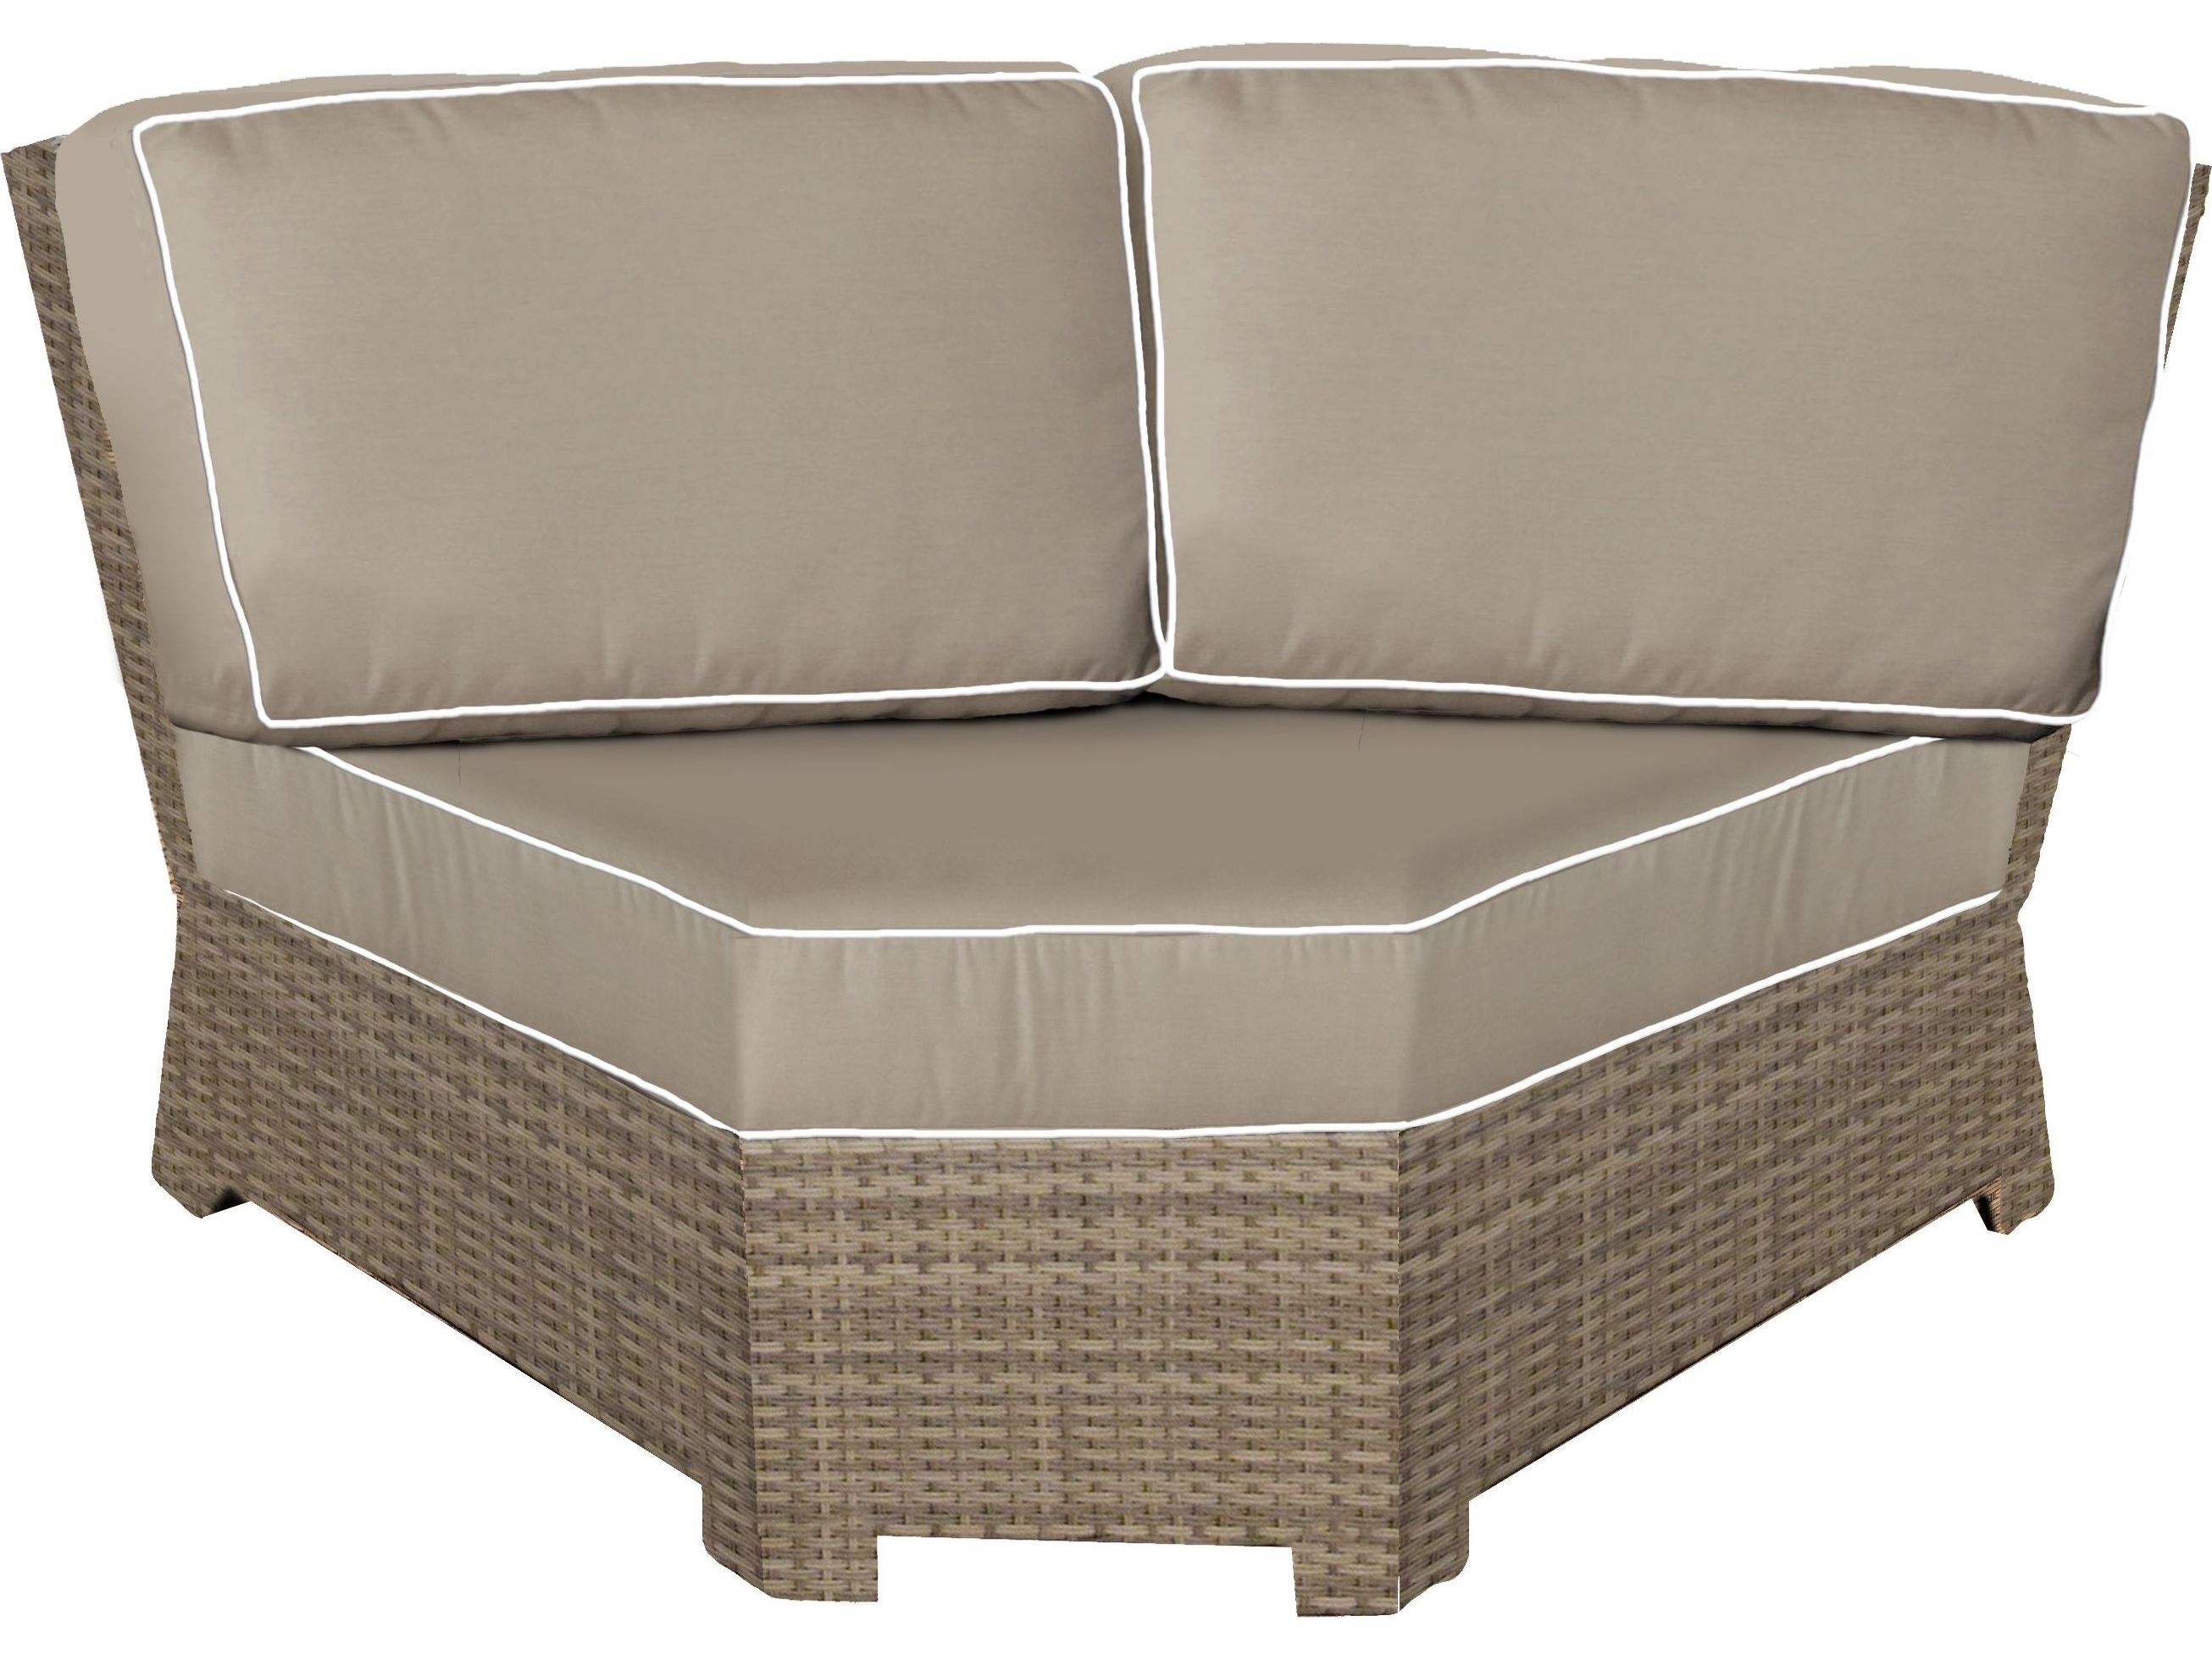 Forever Patio Barbados Wicker Sectional 45 Degree Corner